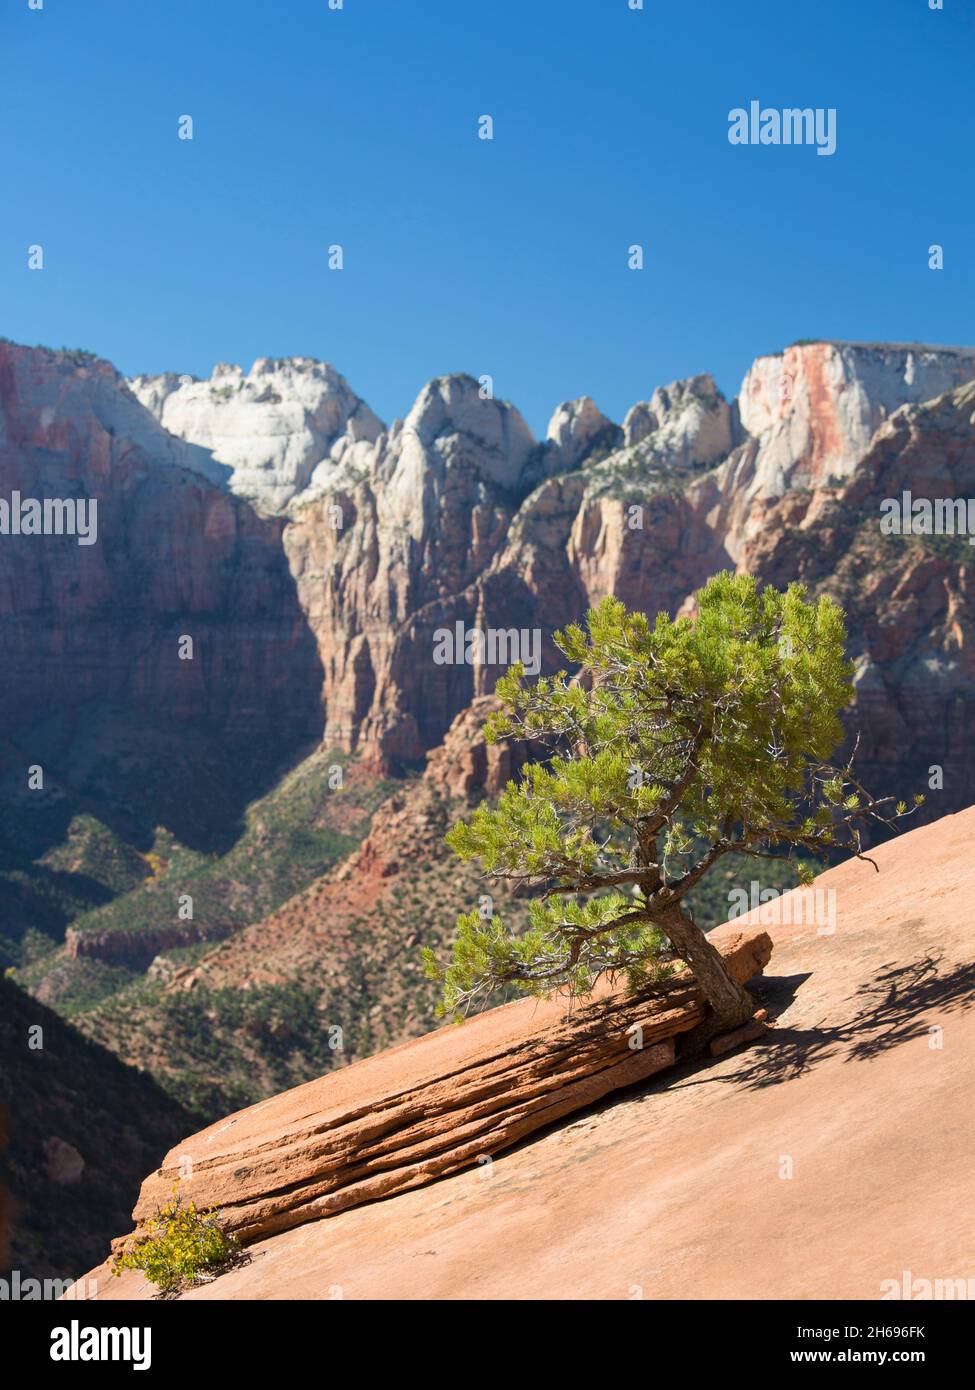 Zion National Park, Utah, USA. Lone pine tree clinging to sandstone outcrop beside the Canyon Overlook Trail, autumn, the Towers of the Virgin beyond. Stock Photo